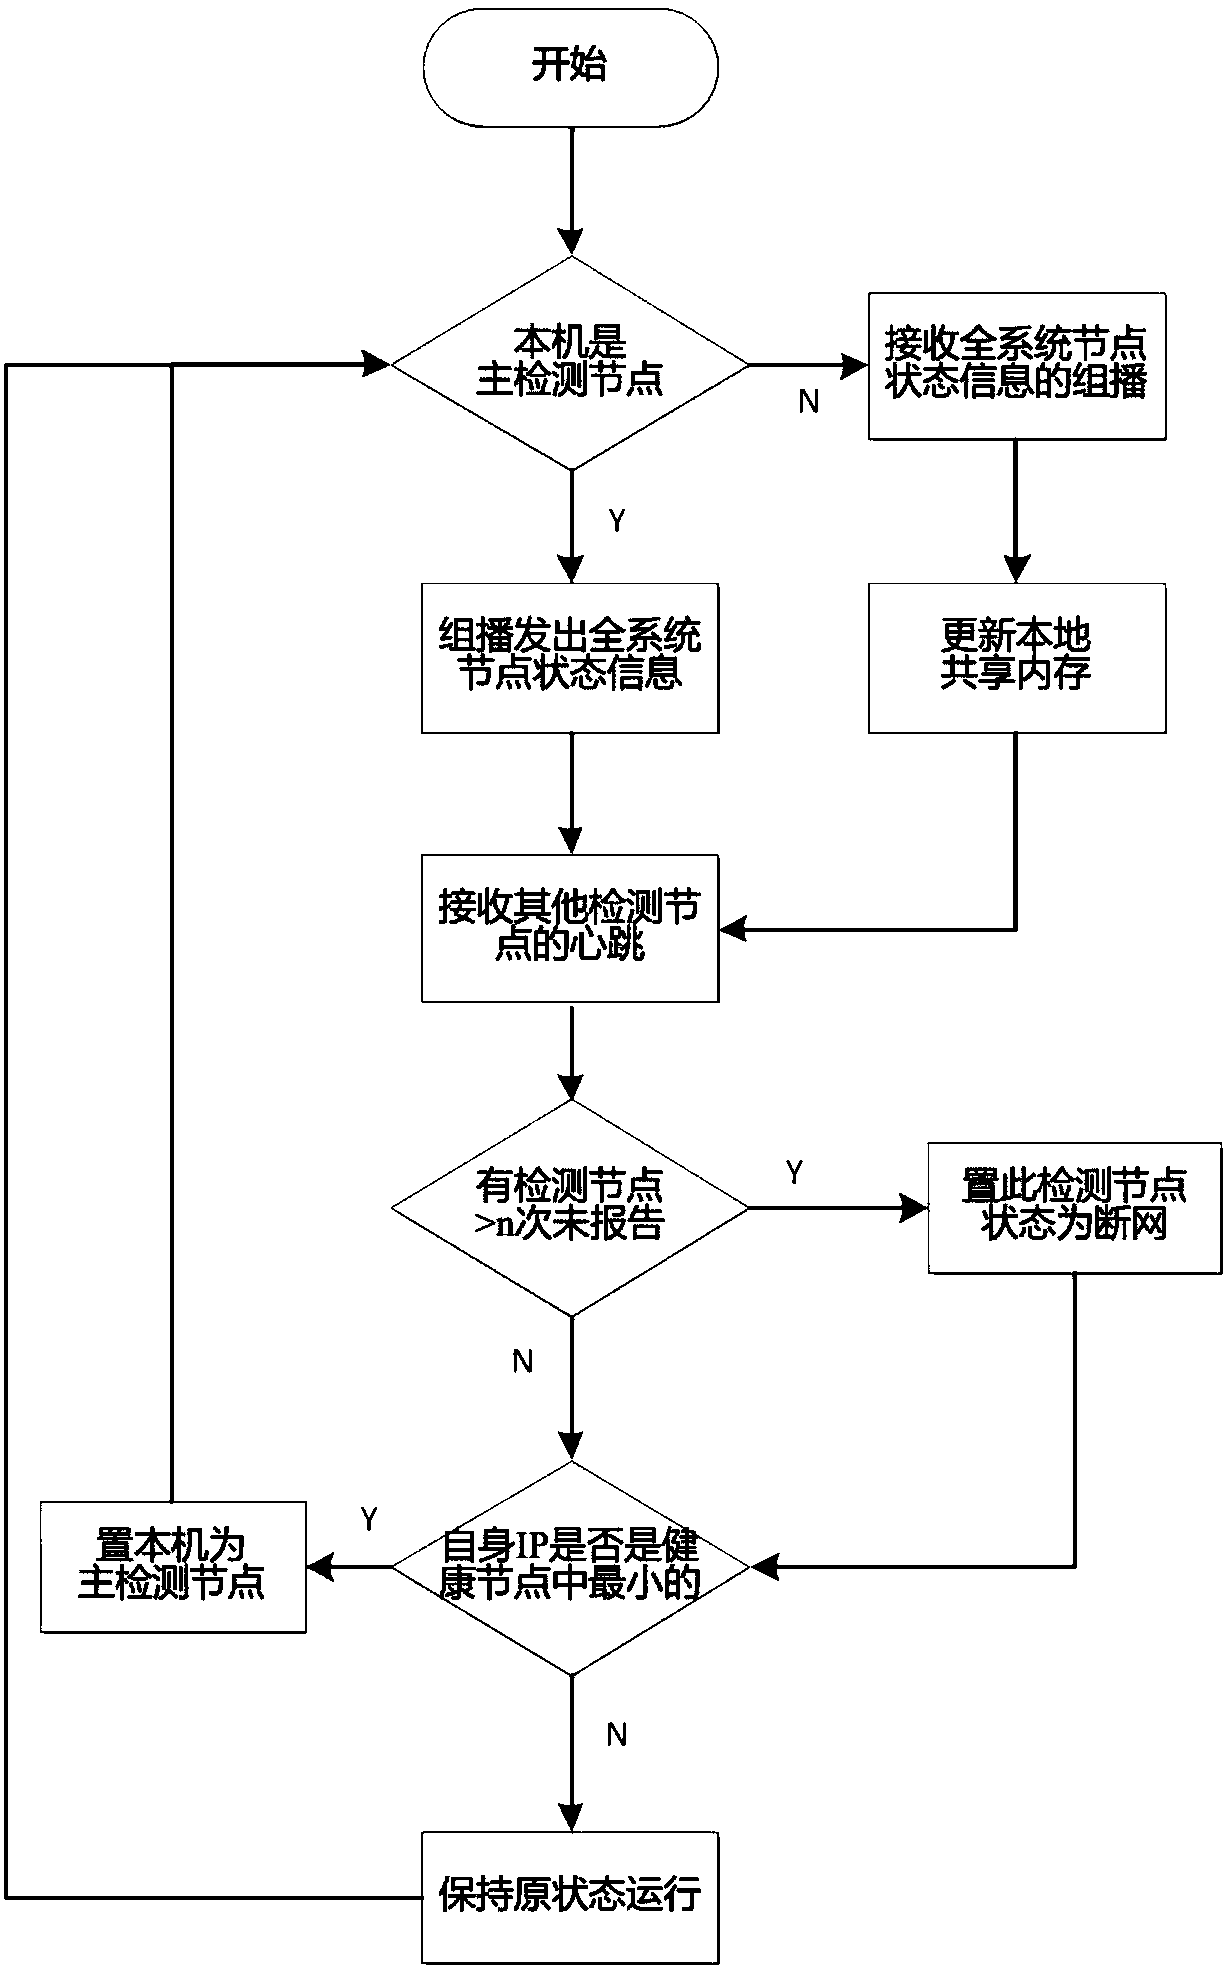 Distributed system node fault detection method based on high-availability detection node